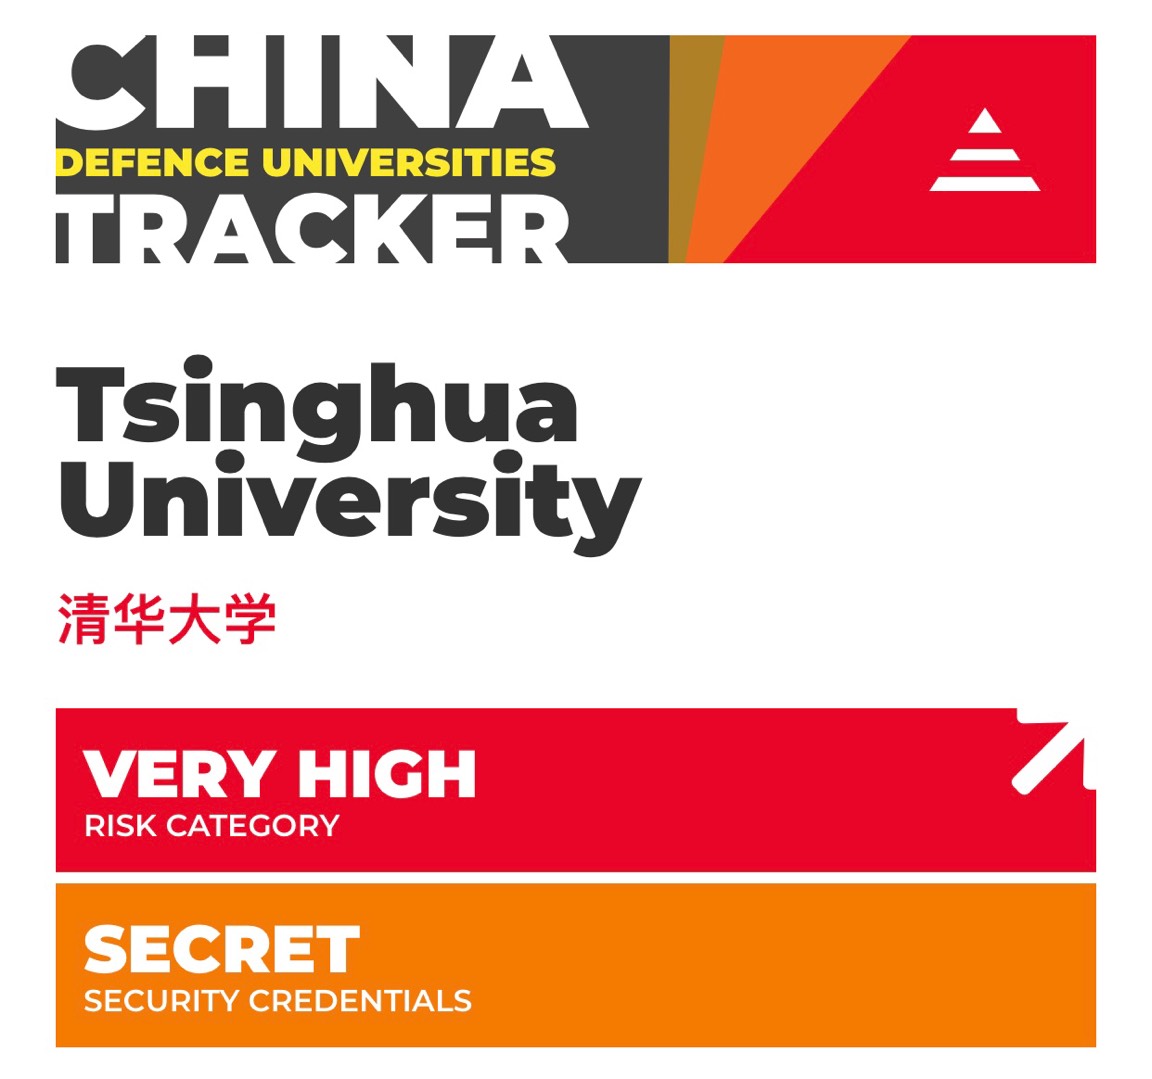 Daniel Baer, former US ambassador, senior fellow at Carnegie Endowment which has joint project with Tsinghua U - designated "Very High Risk" for its high-level defense research with the PLA & cyber attacks against the US.Canergie Endowment had received millions $ from China